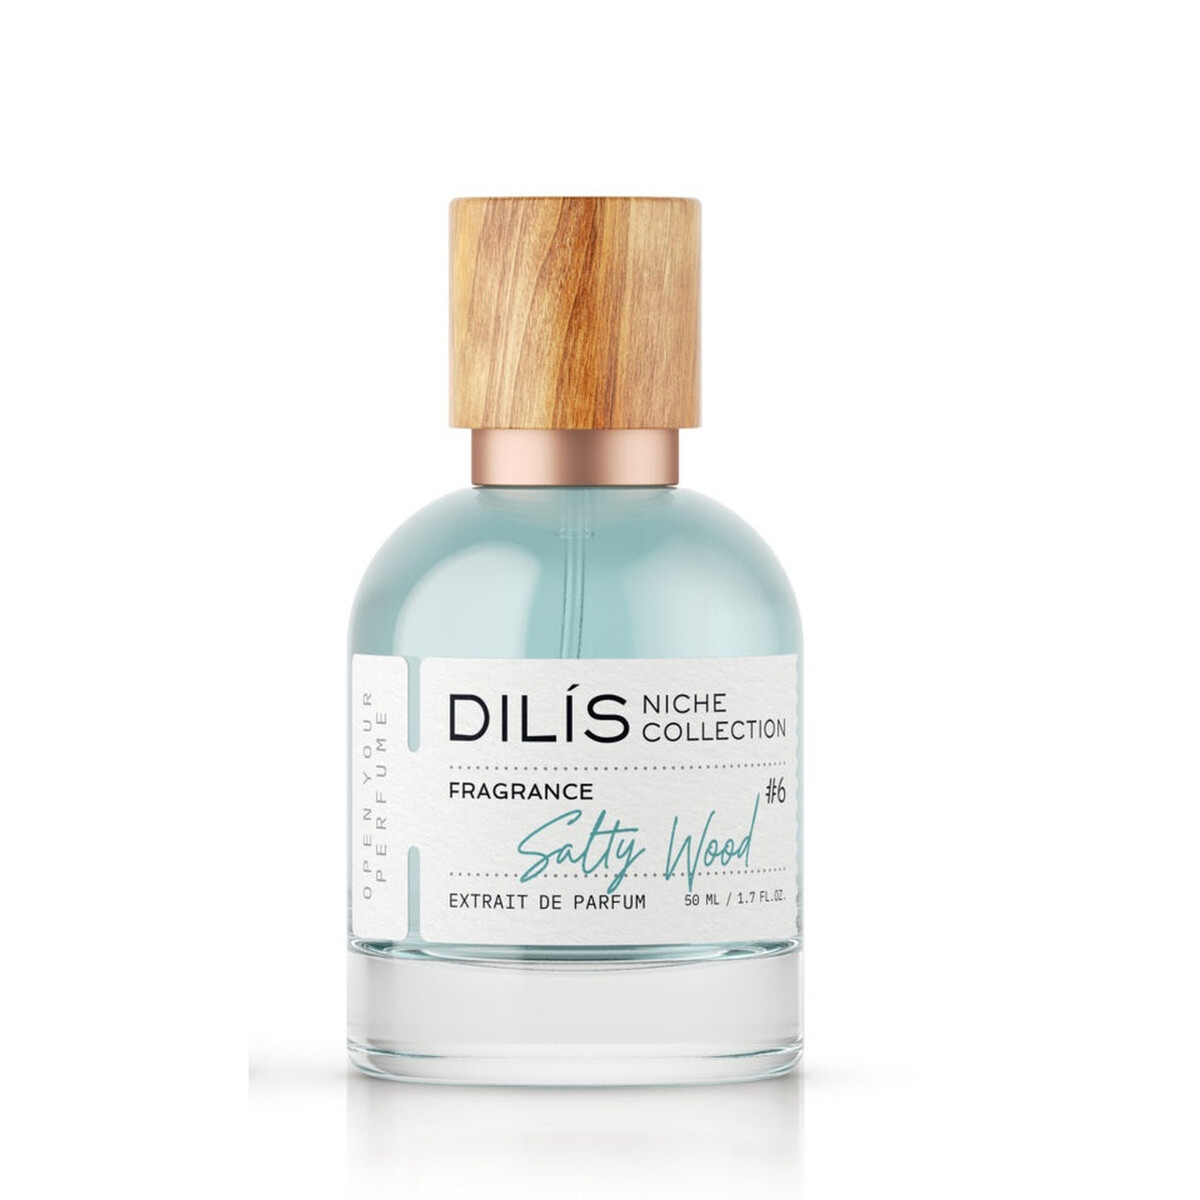   dilis niche collection